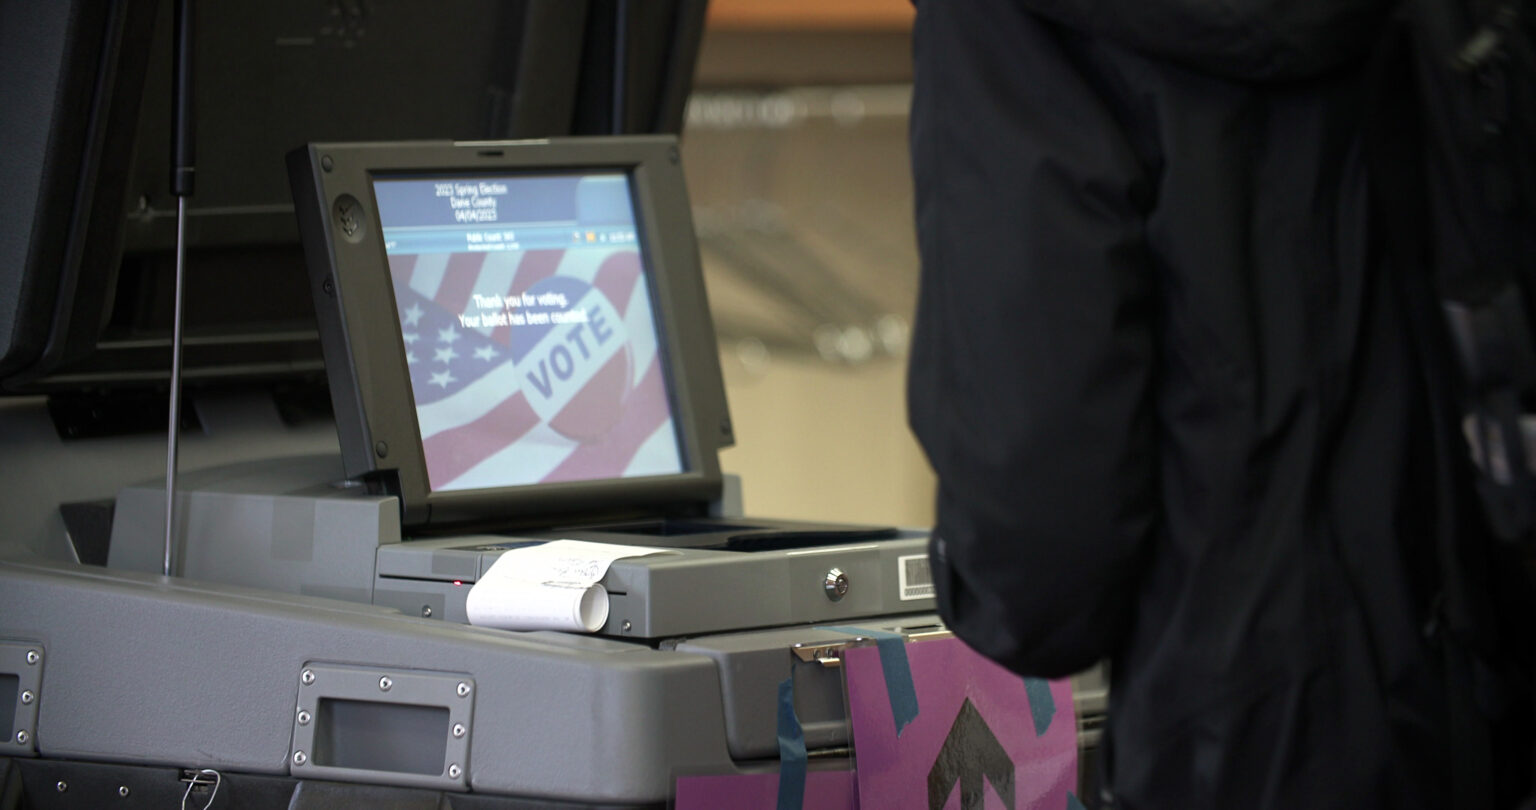 A screen on a ballot tabulator shows a graphic with a U.S. flag and a red-white-and-blue button with the word VOTE, with a piece of paper with an upward pointing arrow taped to its side as a blurry person standing in the foreground approaches the machine.